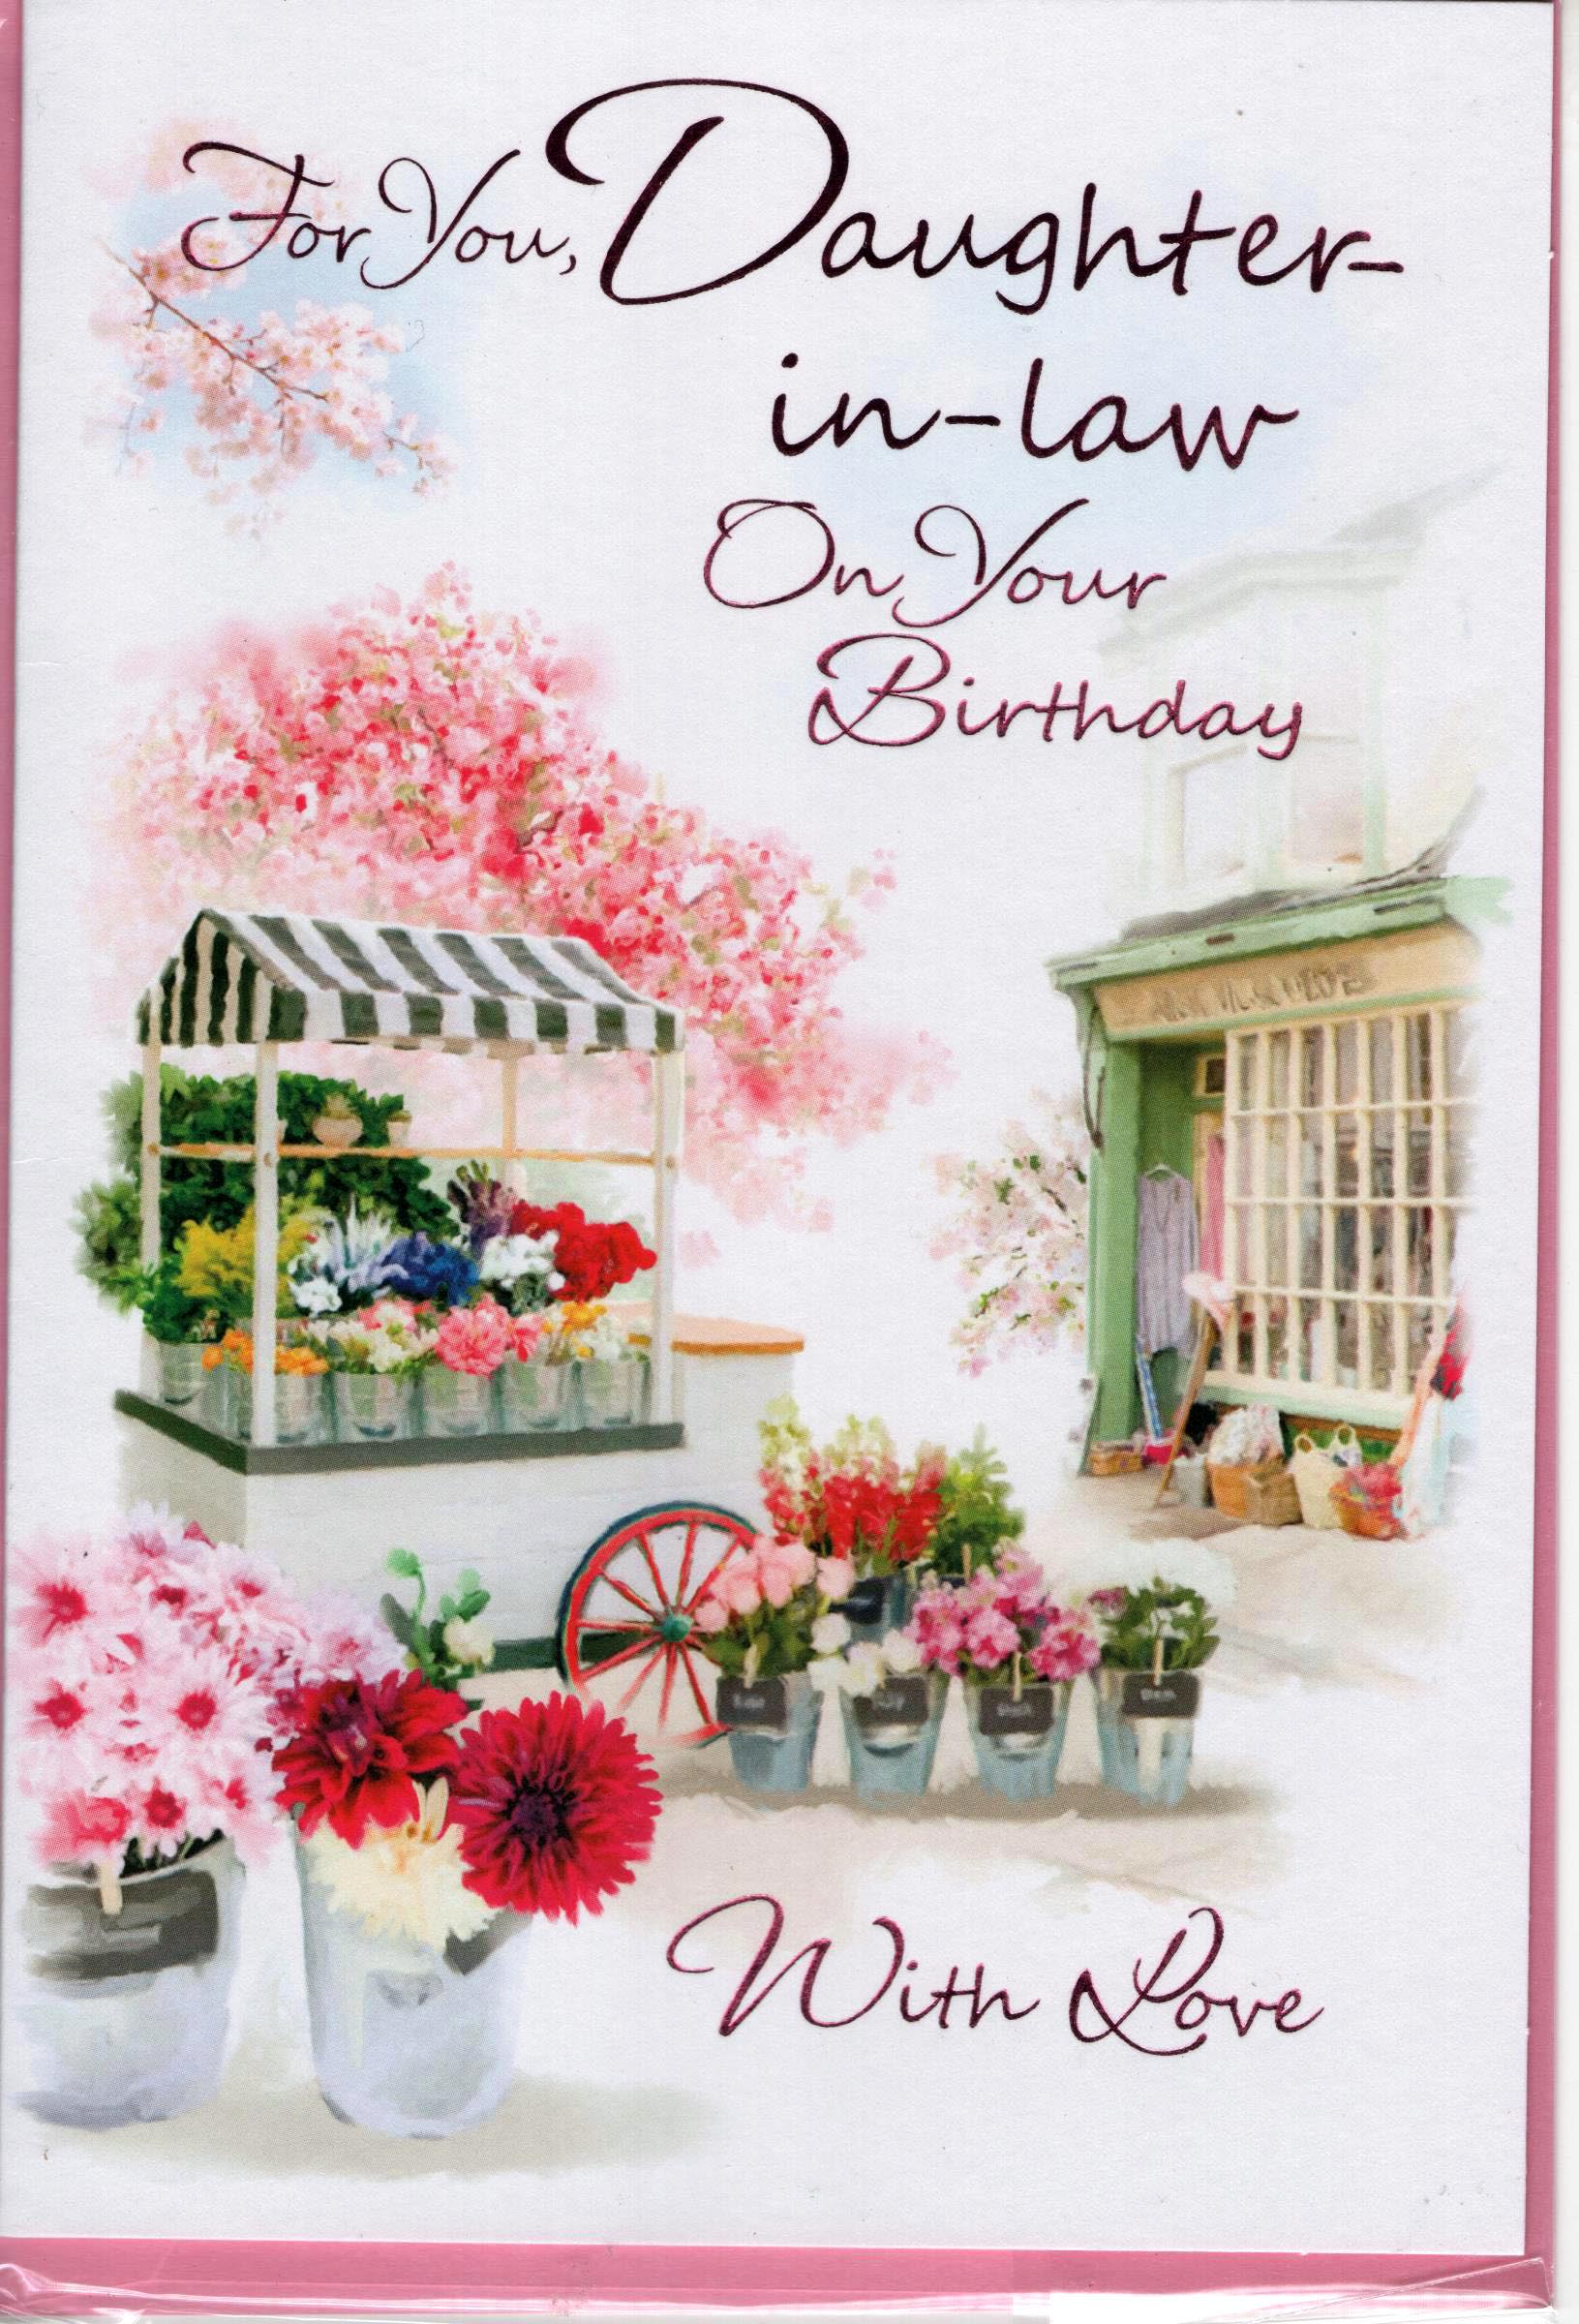 For You Daughter - In - Law on Your Birthday With Love